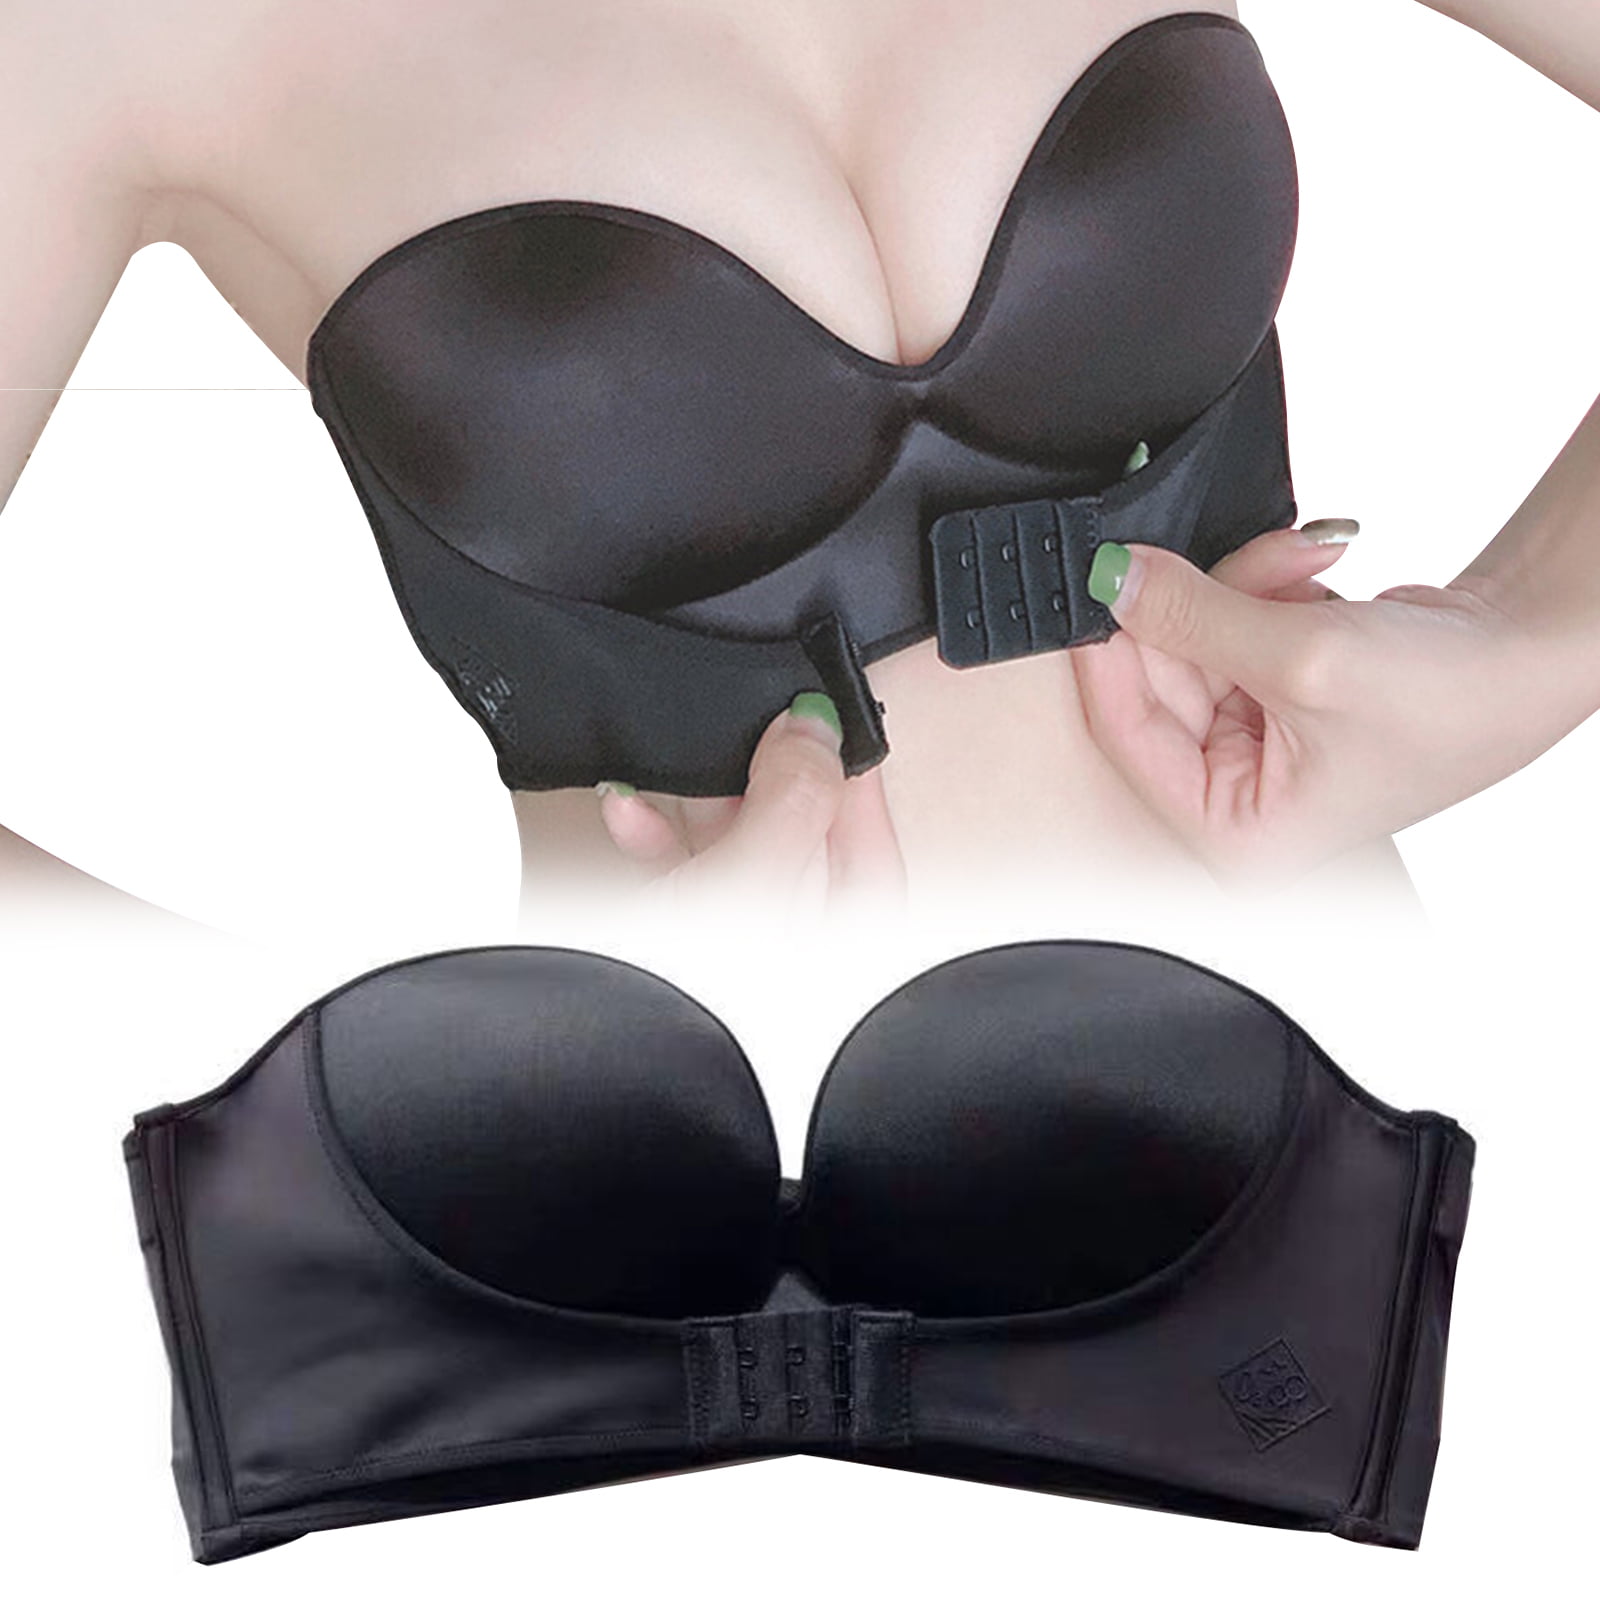 Strapless Front Buckle Lift Bra, Women Invisible Strapless Super